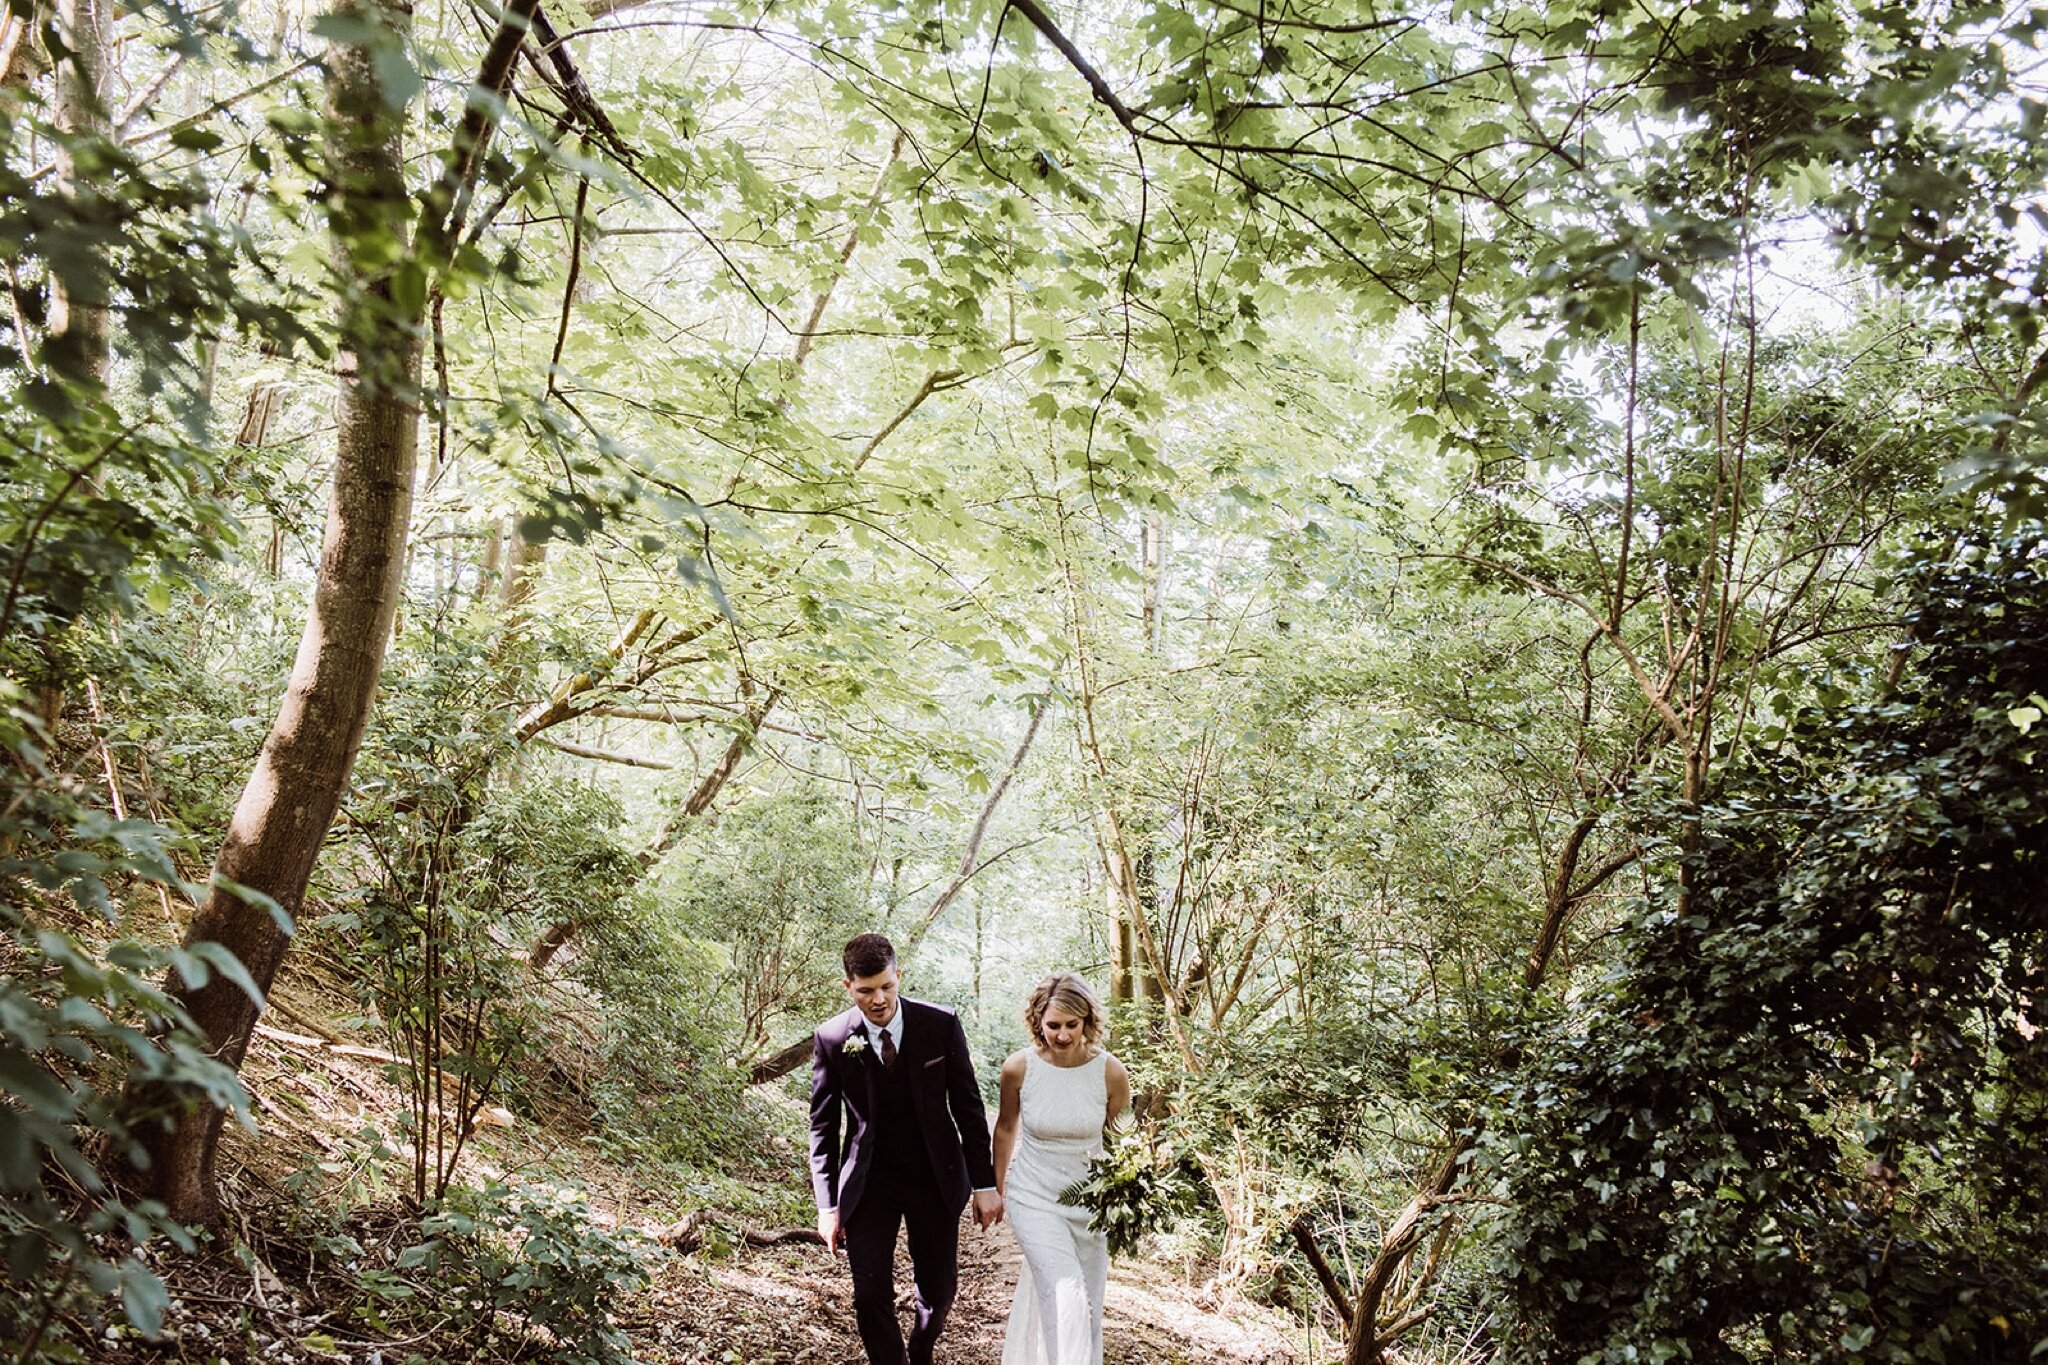 16_O+F-291_bride_sussex_grace_garden_marquee_english_couples_lace_portraits_loves_groom_diy_wedding.jpg